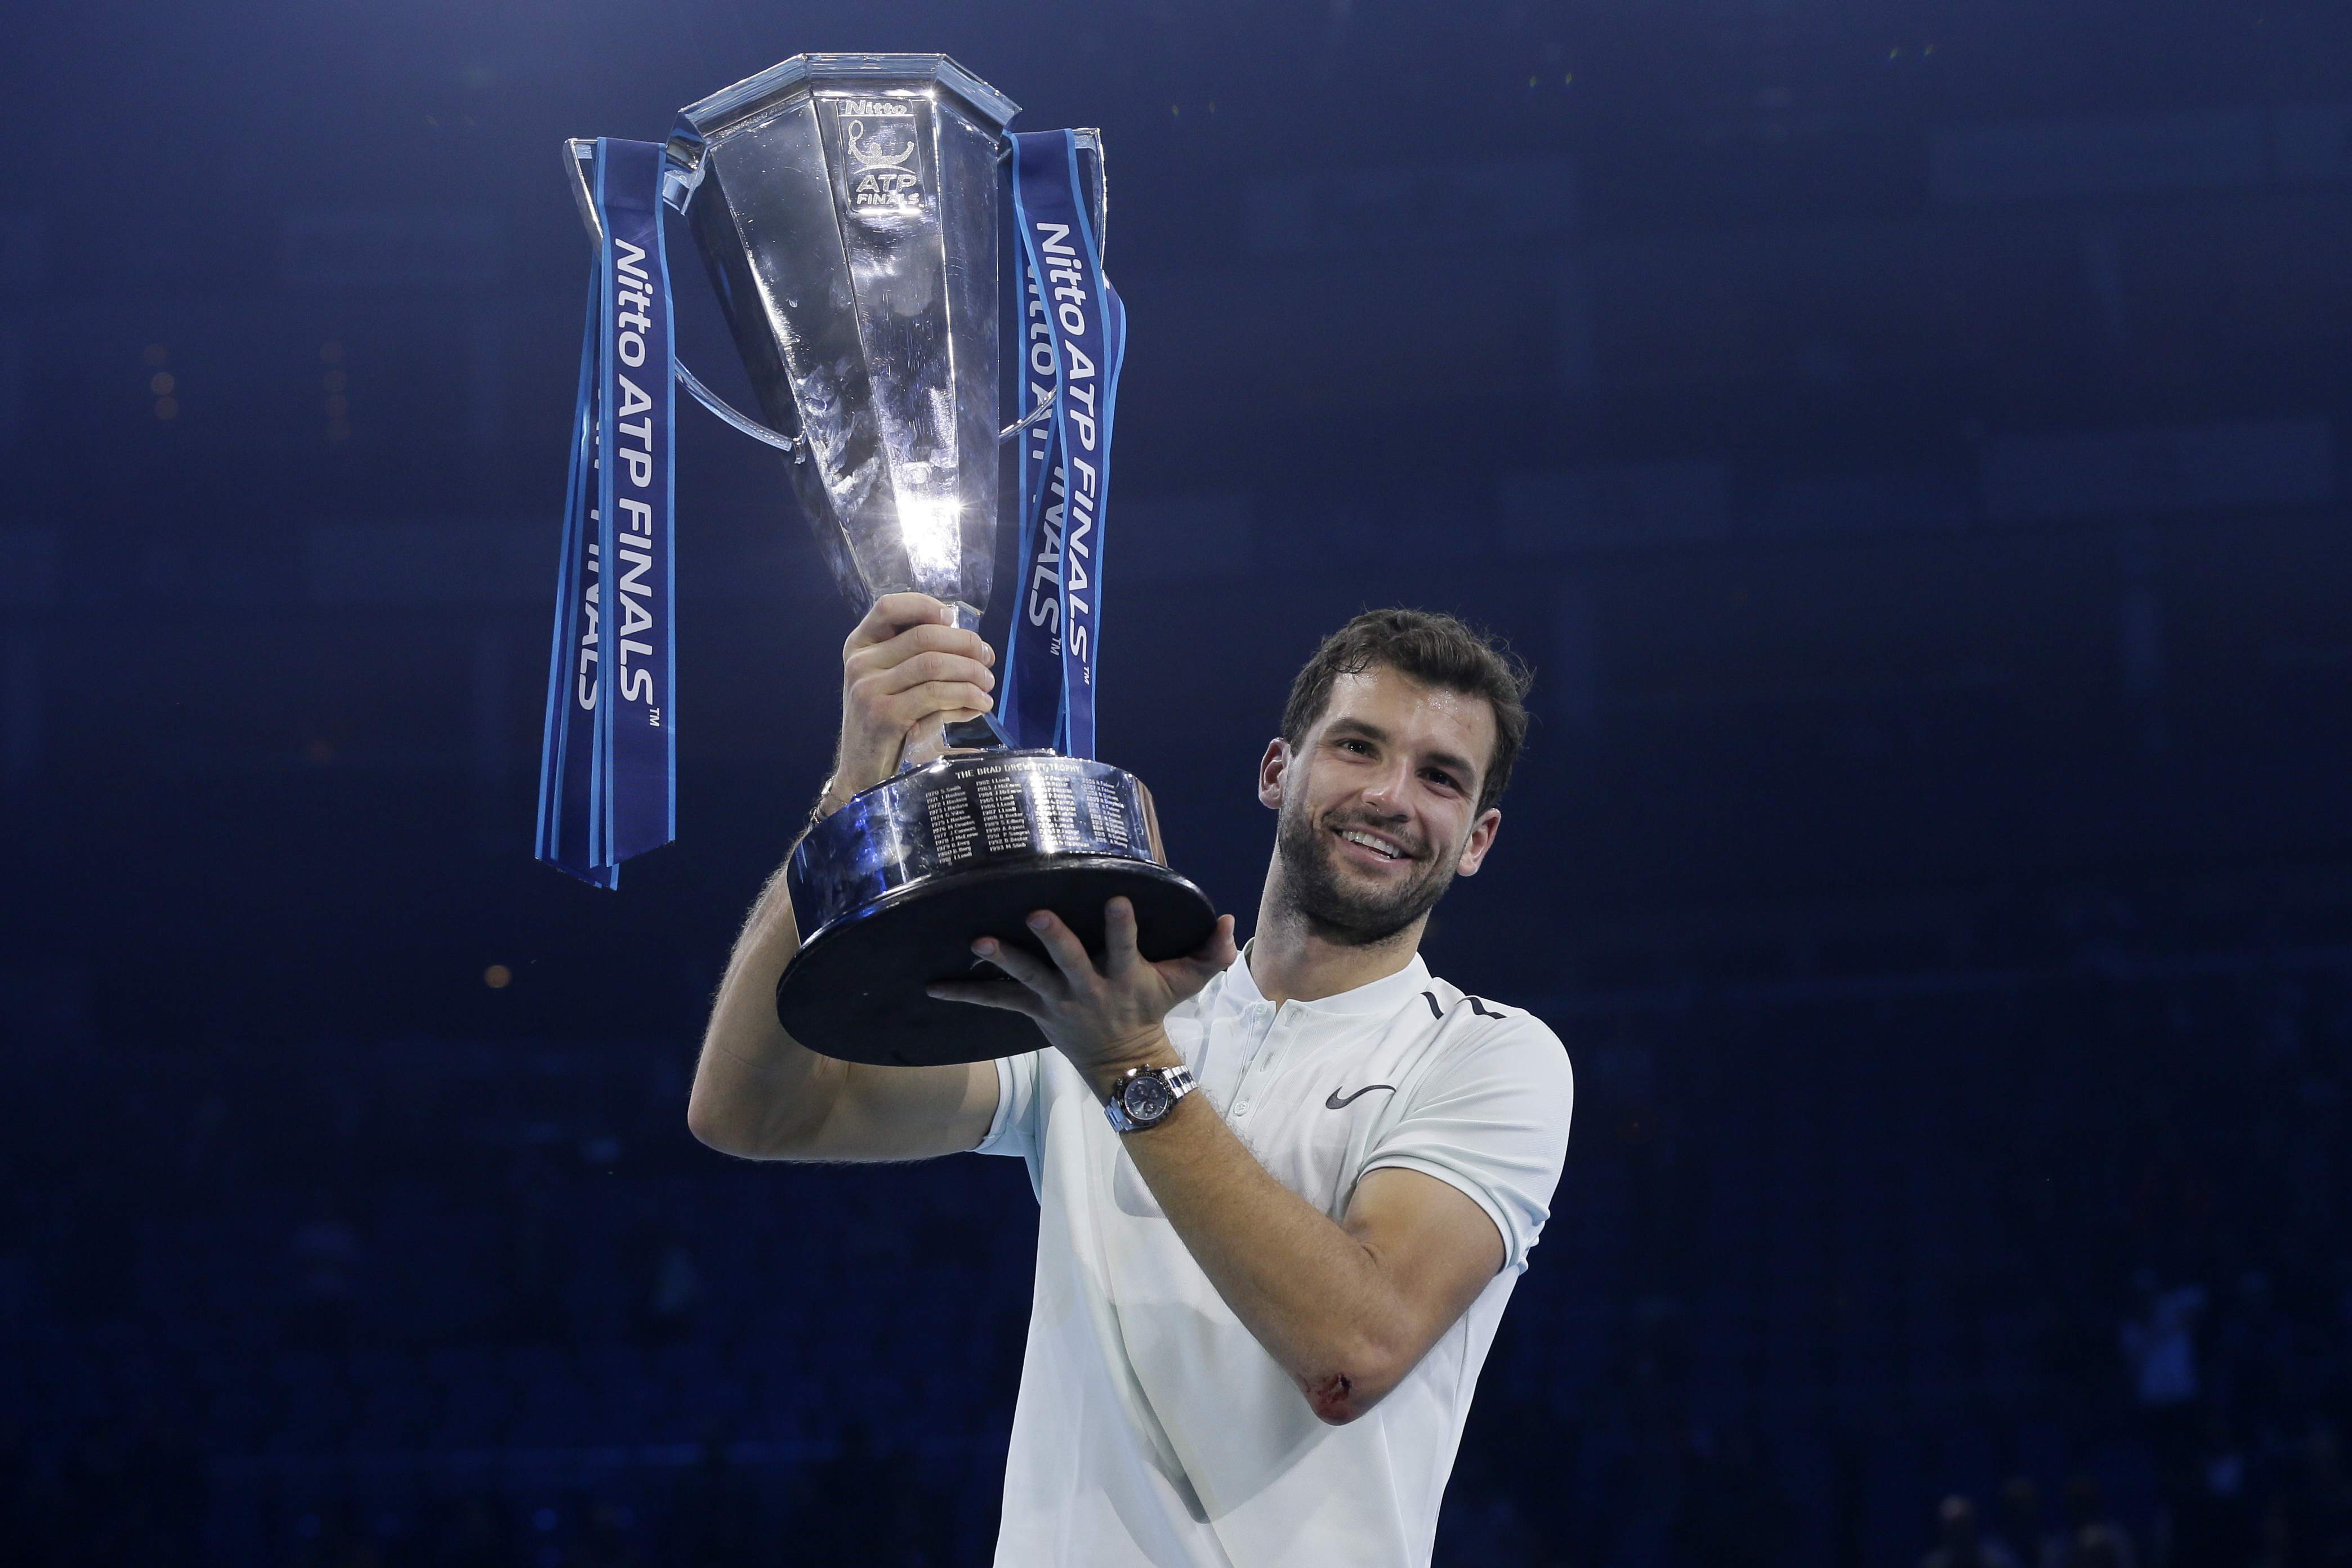 Bulgaria’s Dimitrov Wins ATP Finals in Absence of Stars Financial Tribune